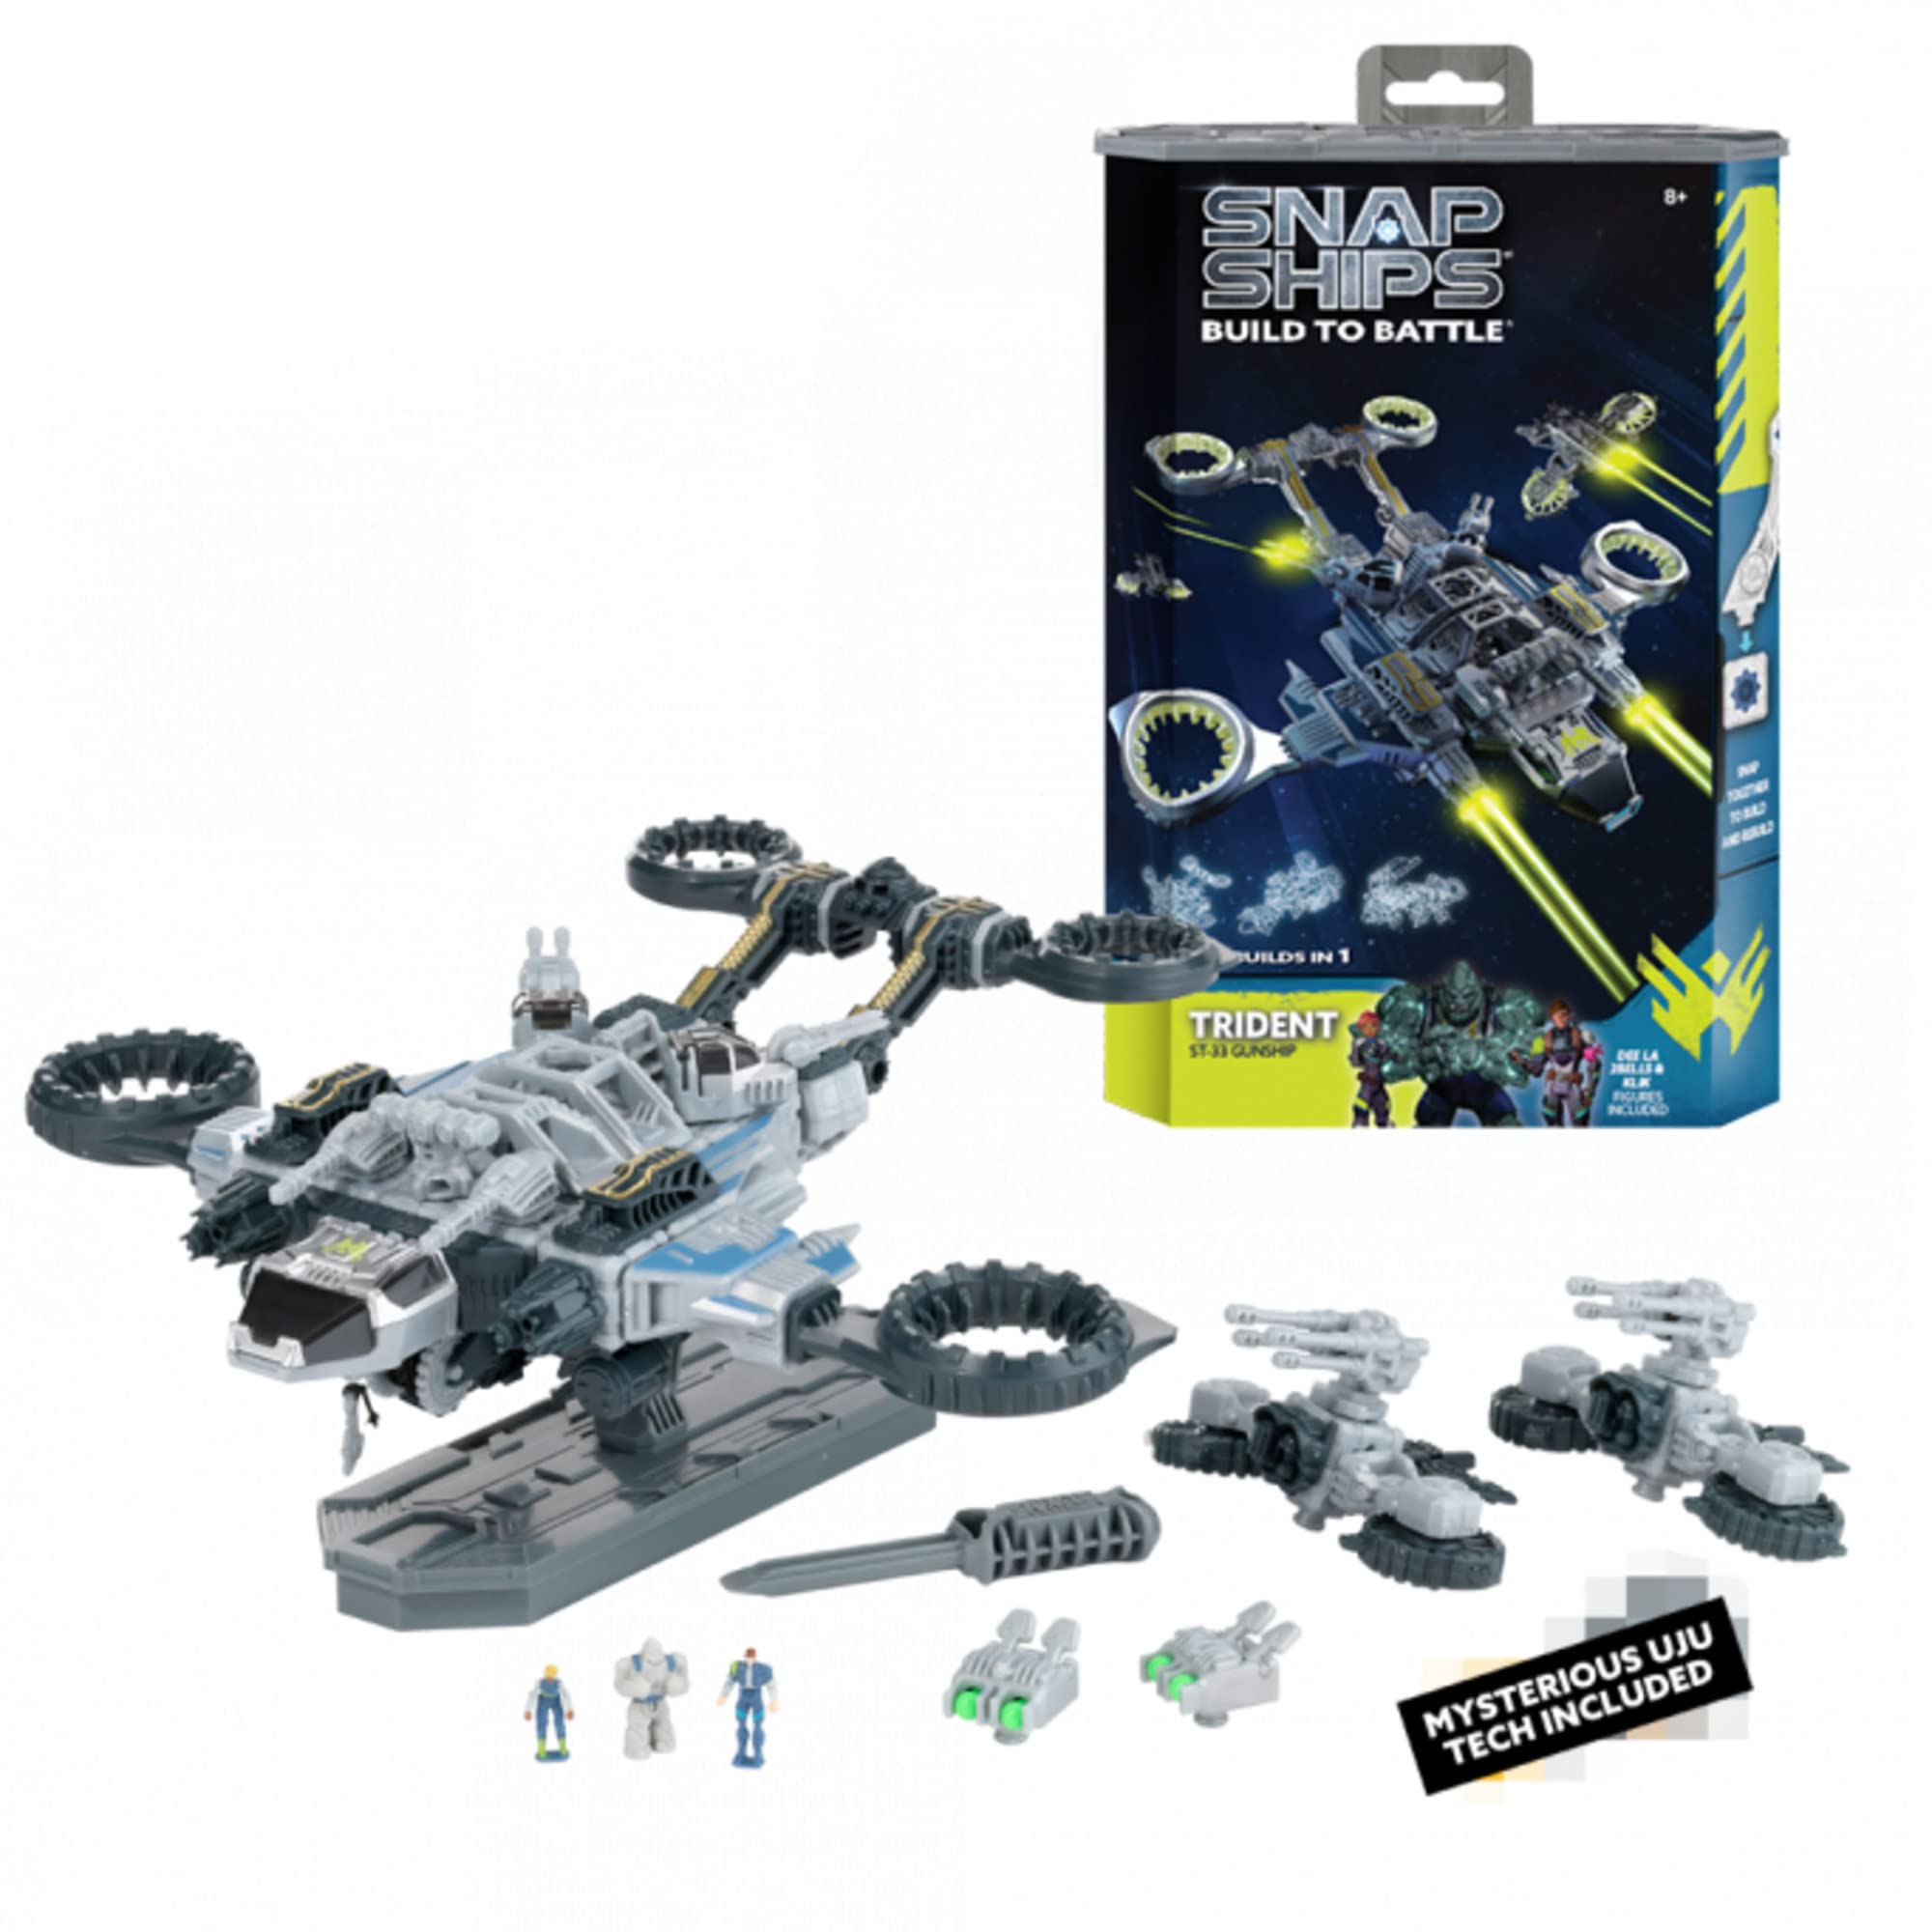 Snap Ships — Trident ST-33 Gunship — Building Construction Toy for Custom Building and Battle Play — for Ages 8+